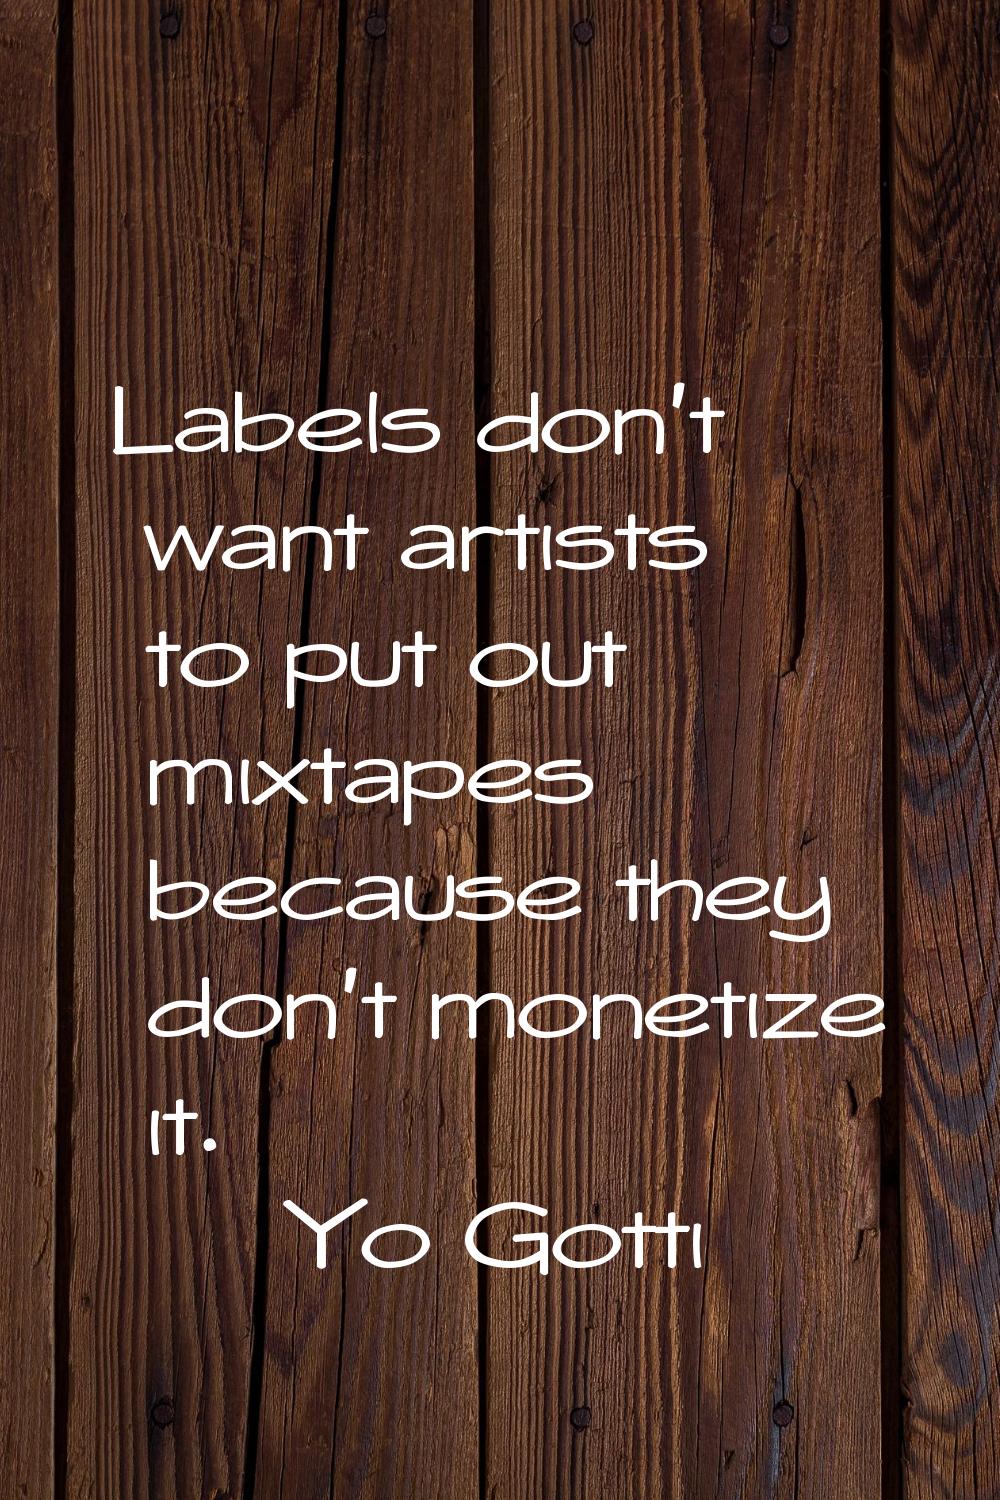 Labels don't want artists to put out mixtapes because they don't monetize it.